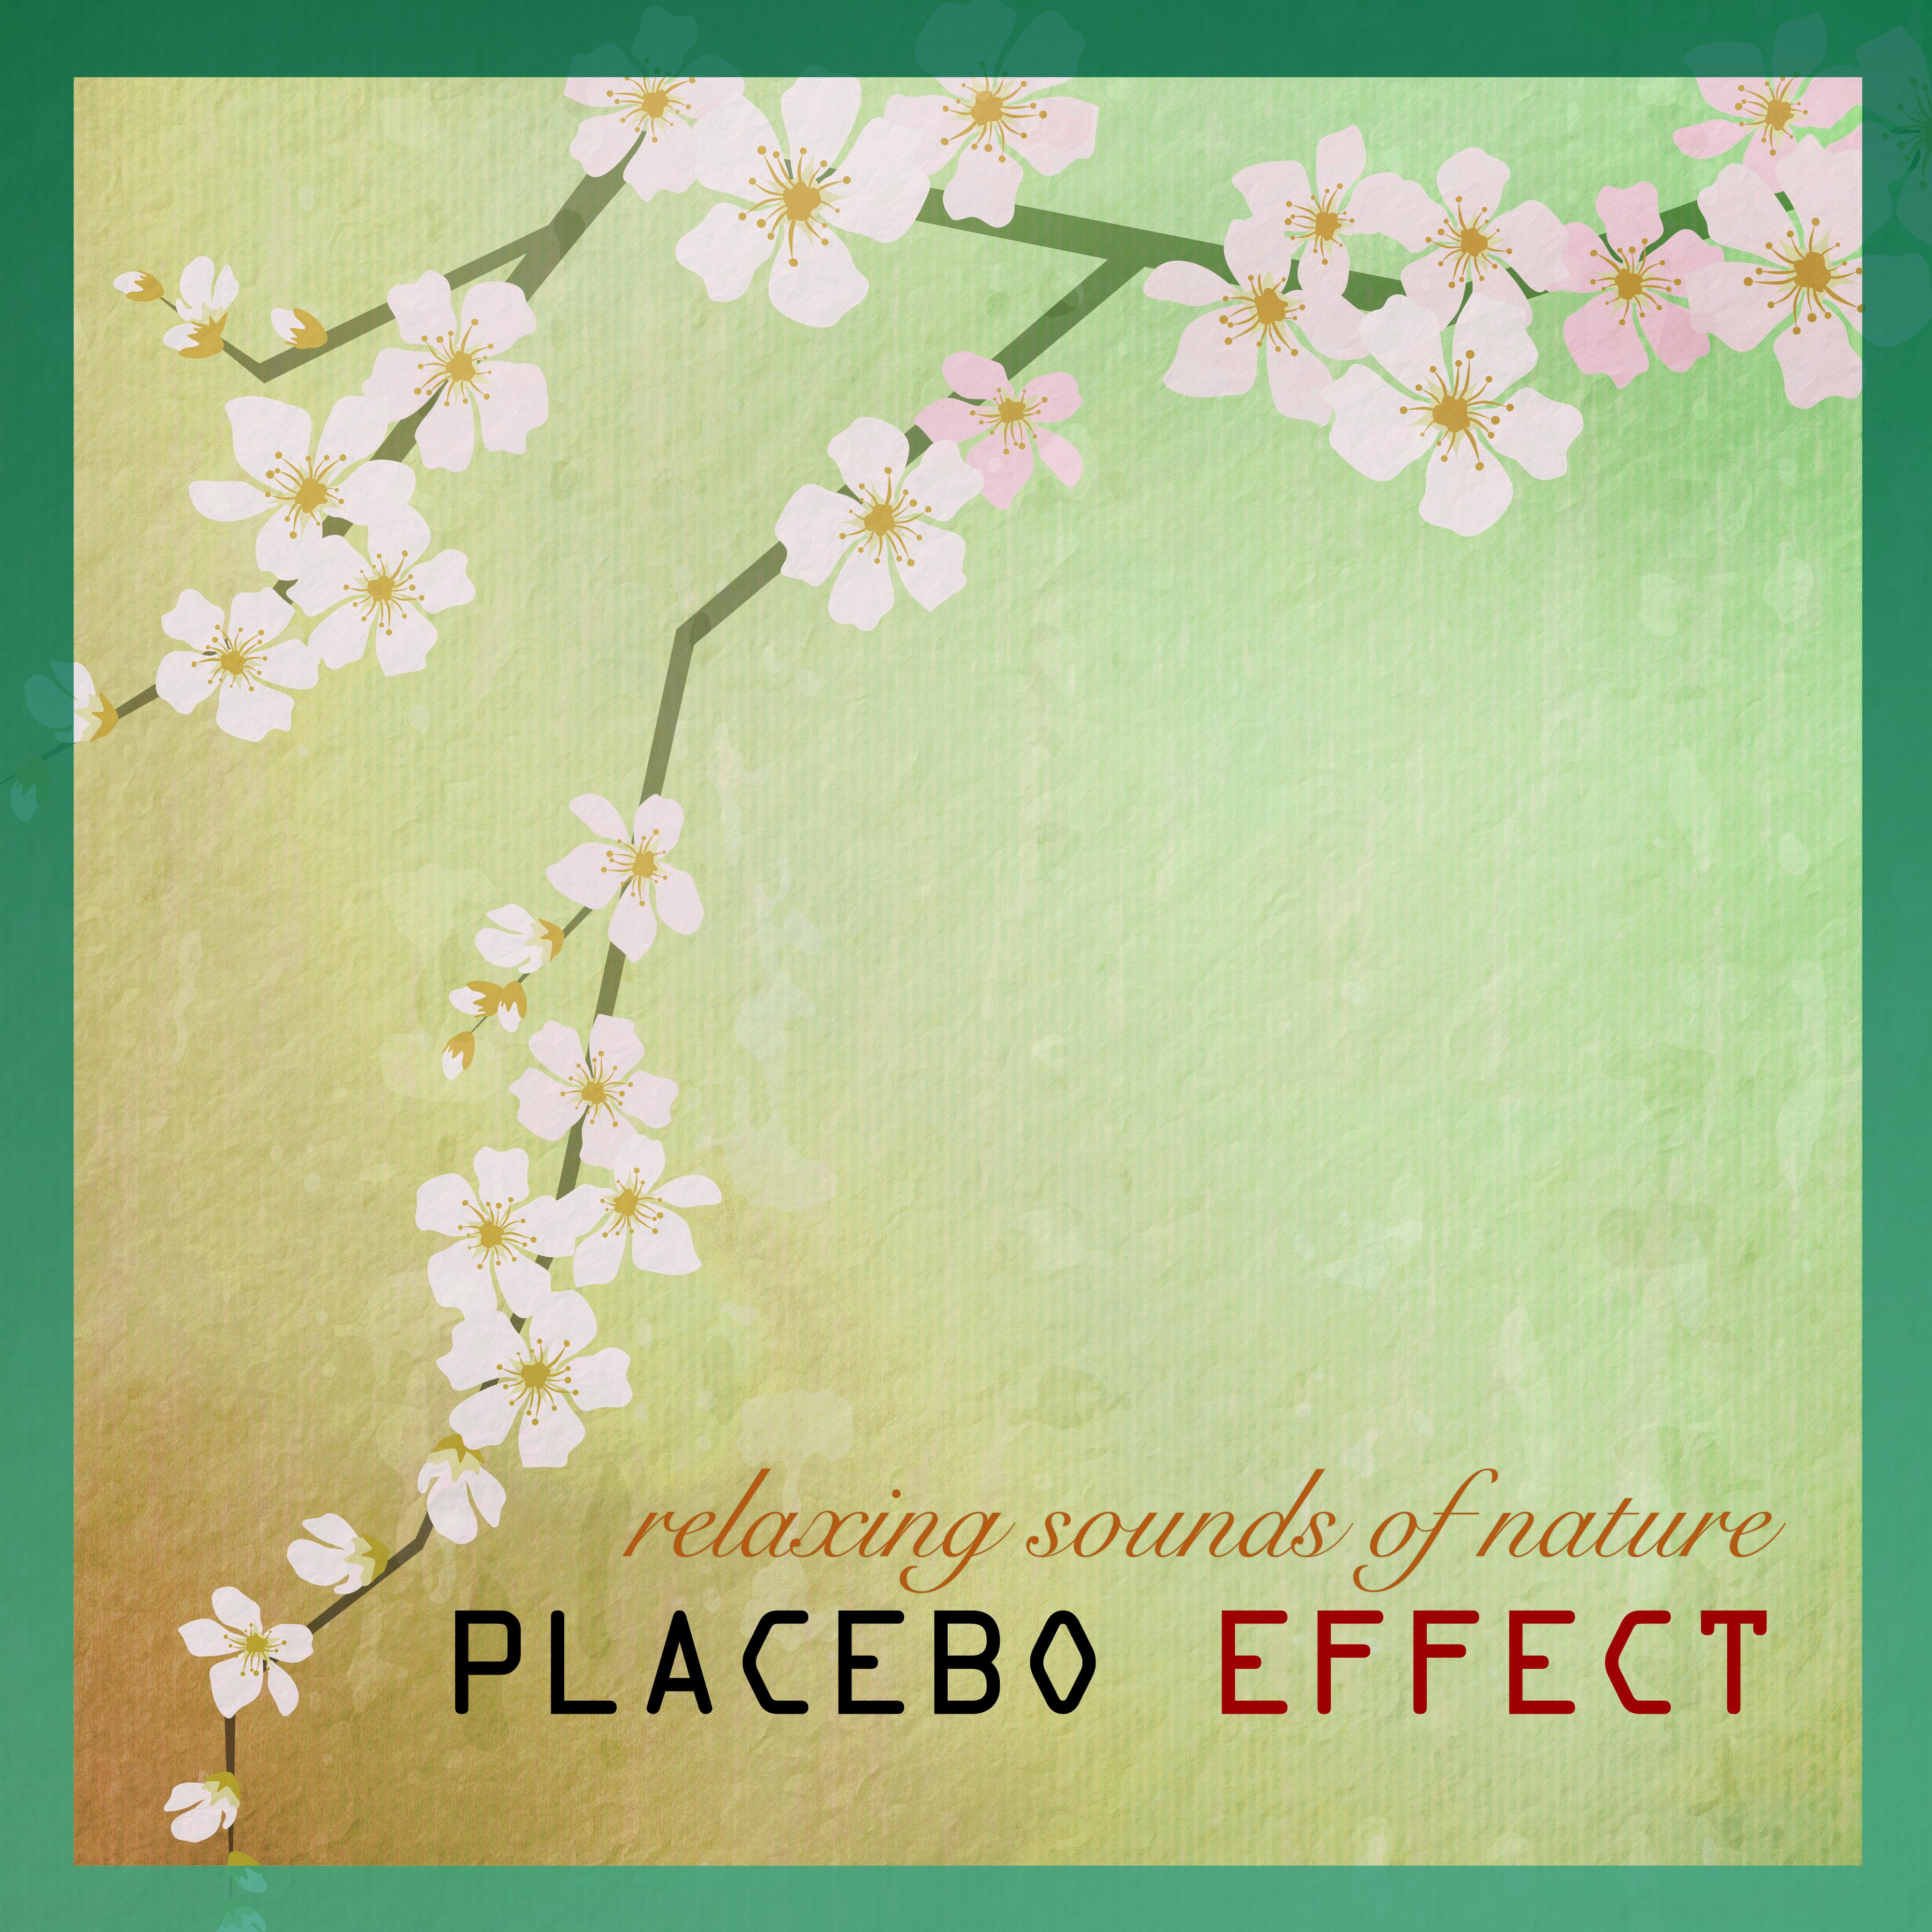 Plecebo Effect Sounds of Nature White Noise for Mindfulness Meditation and Relaxation Sound Therapy